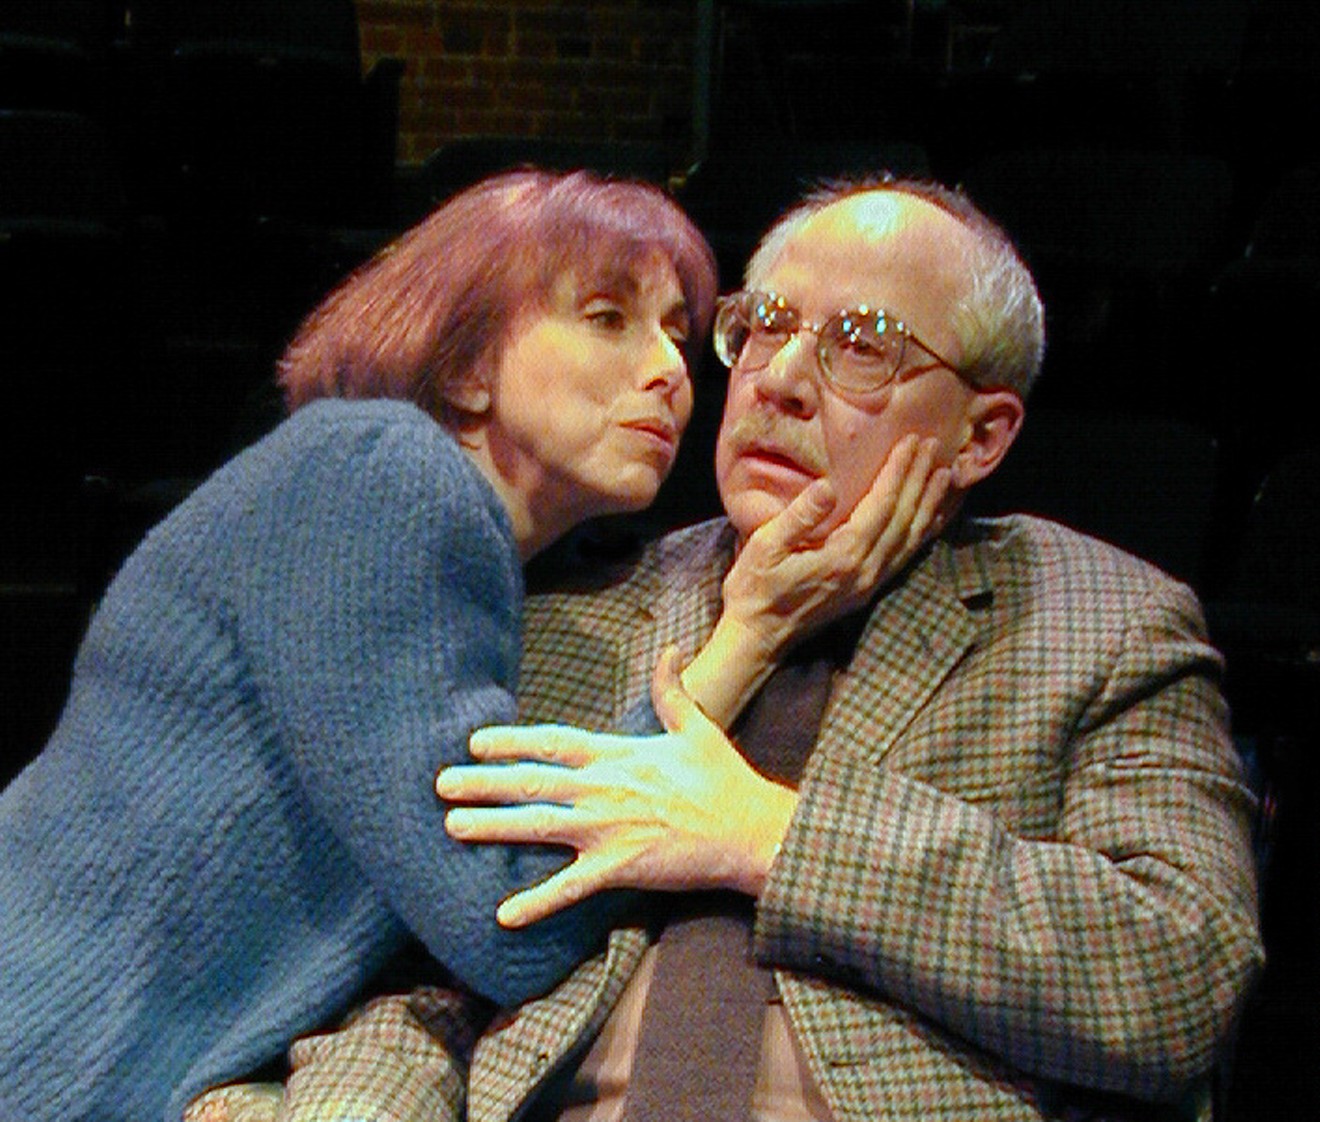 Sallie Diamond and Ed Baierlein in Pinter's The Lover. Courtesy of Germinal Stage